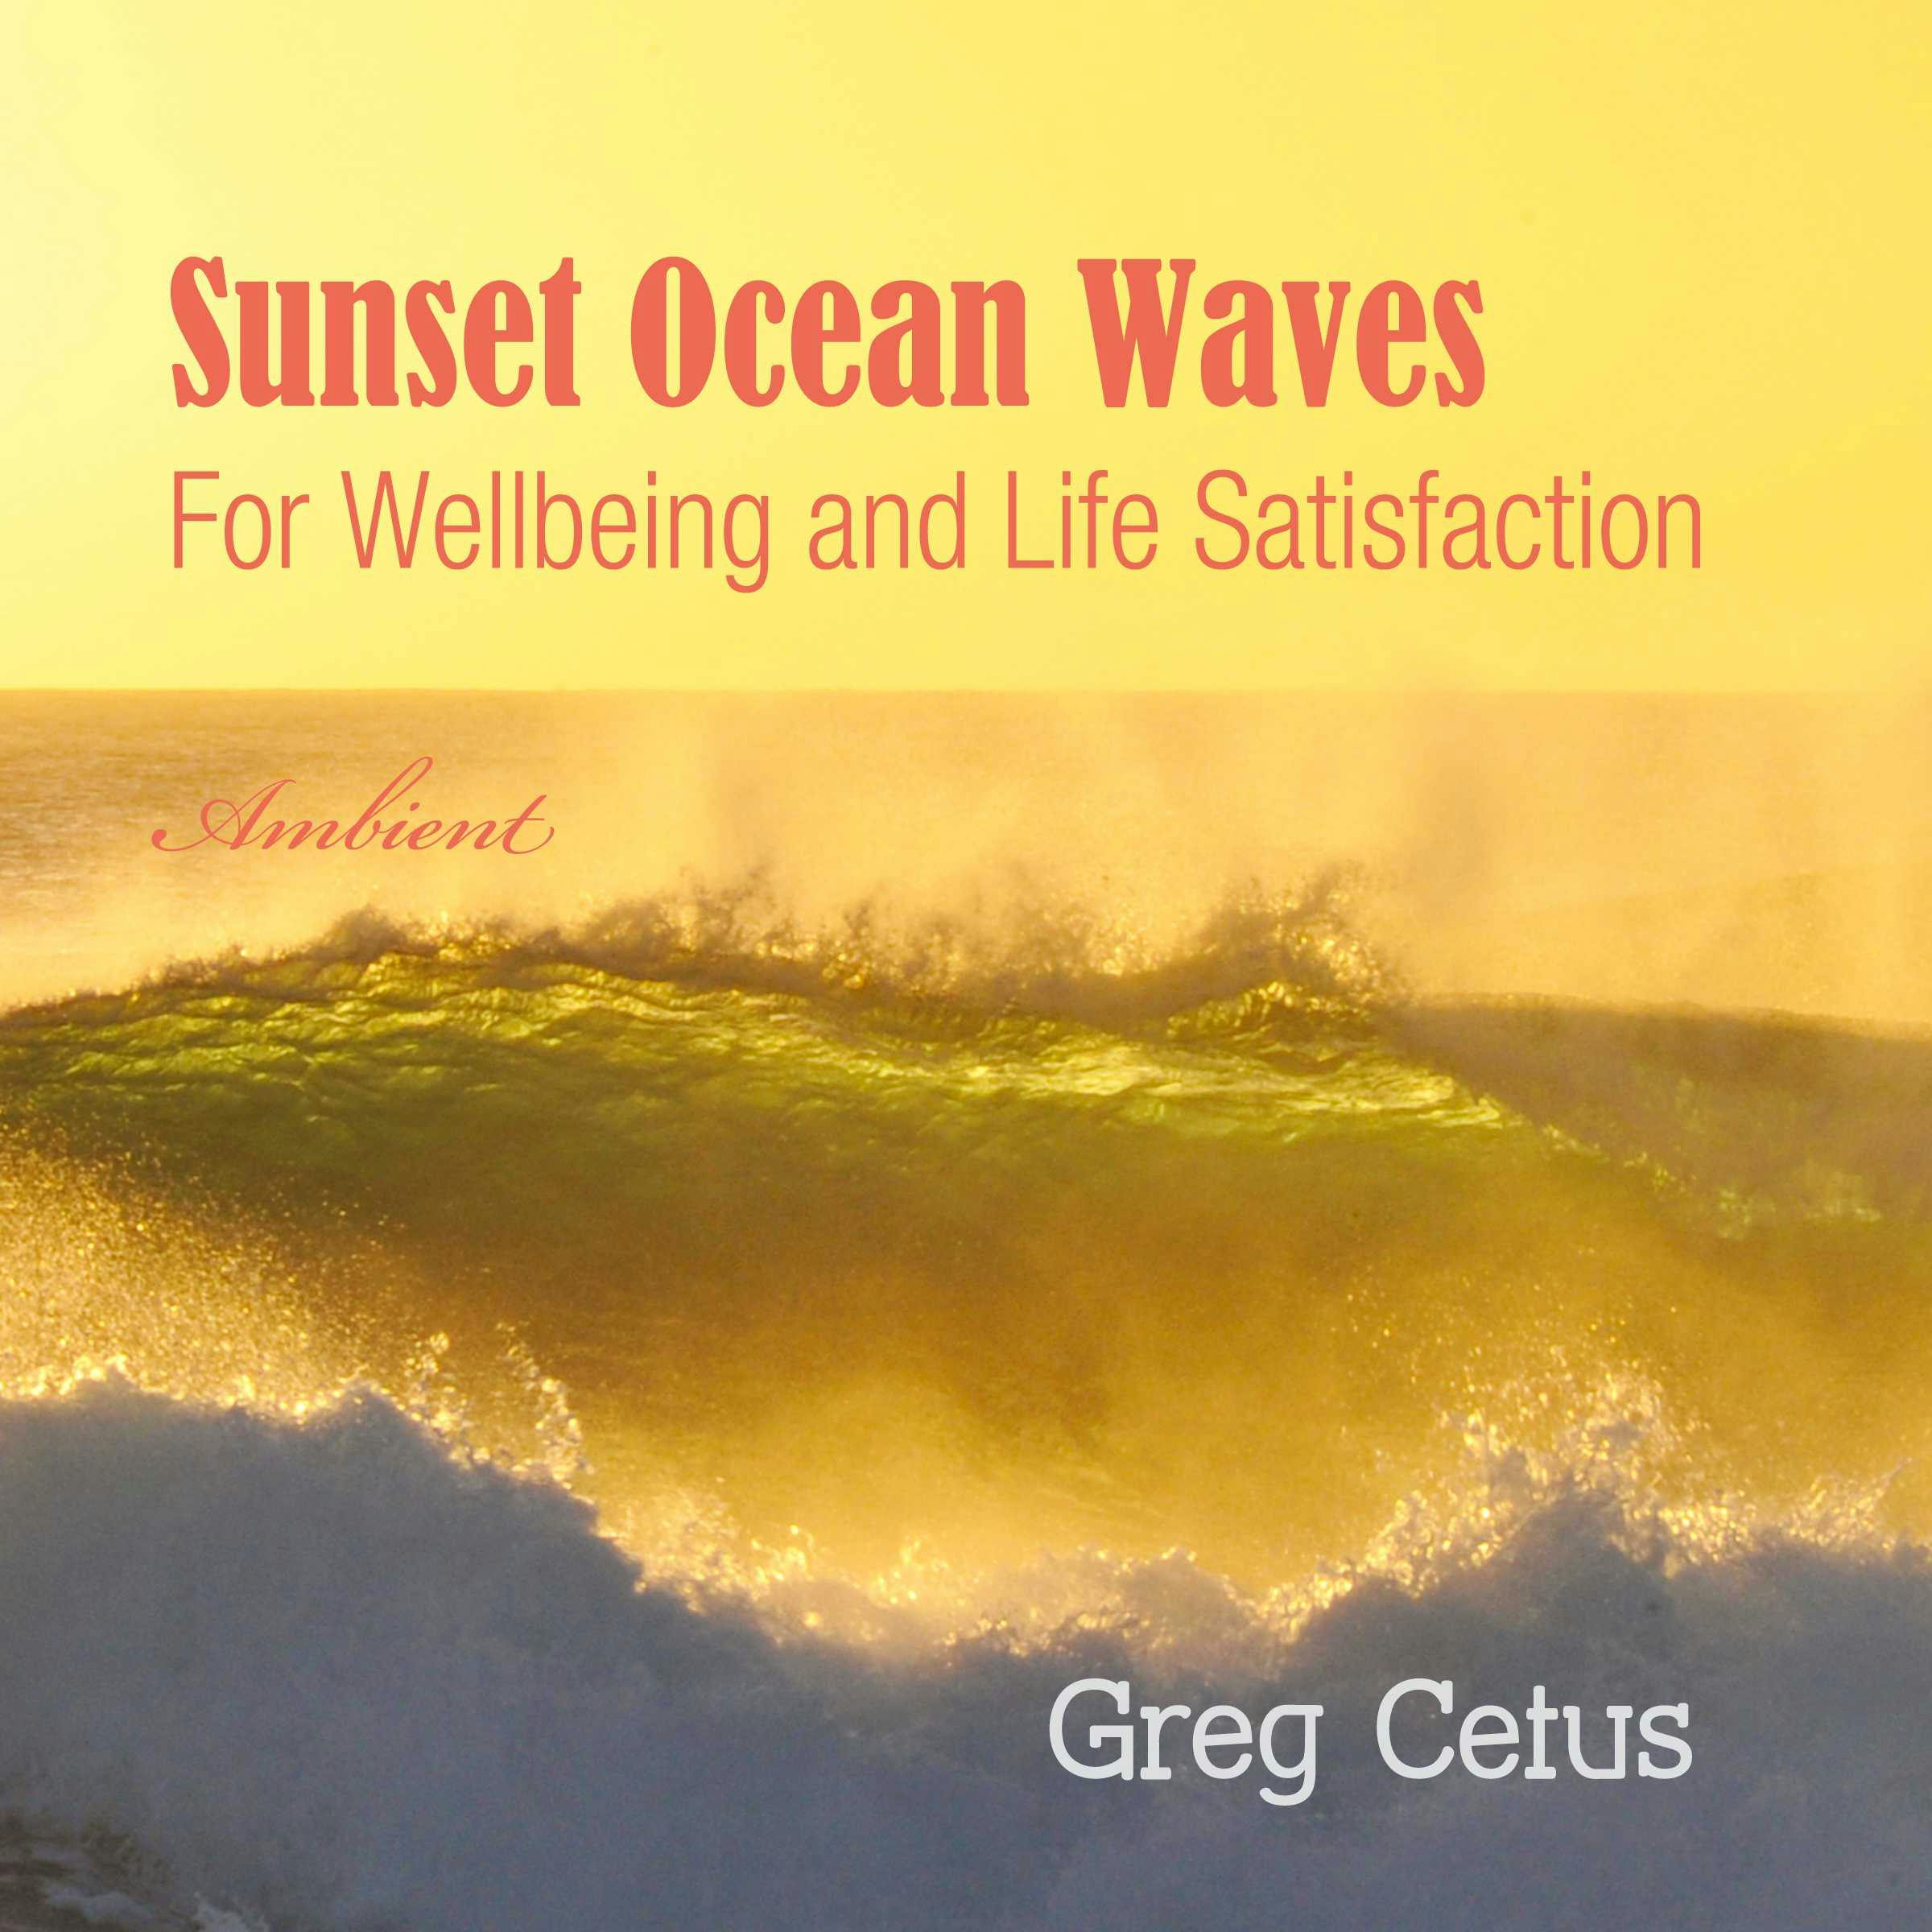 Sunset Ocean Waves: For Wellbeing and Life Satisfaction - Greg Cetus